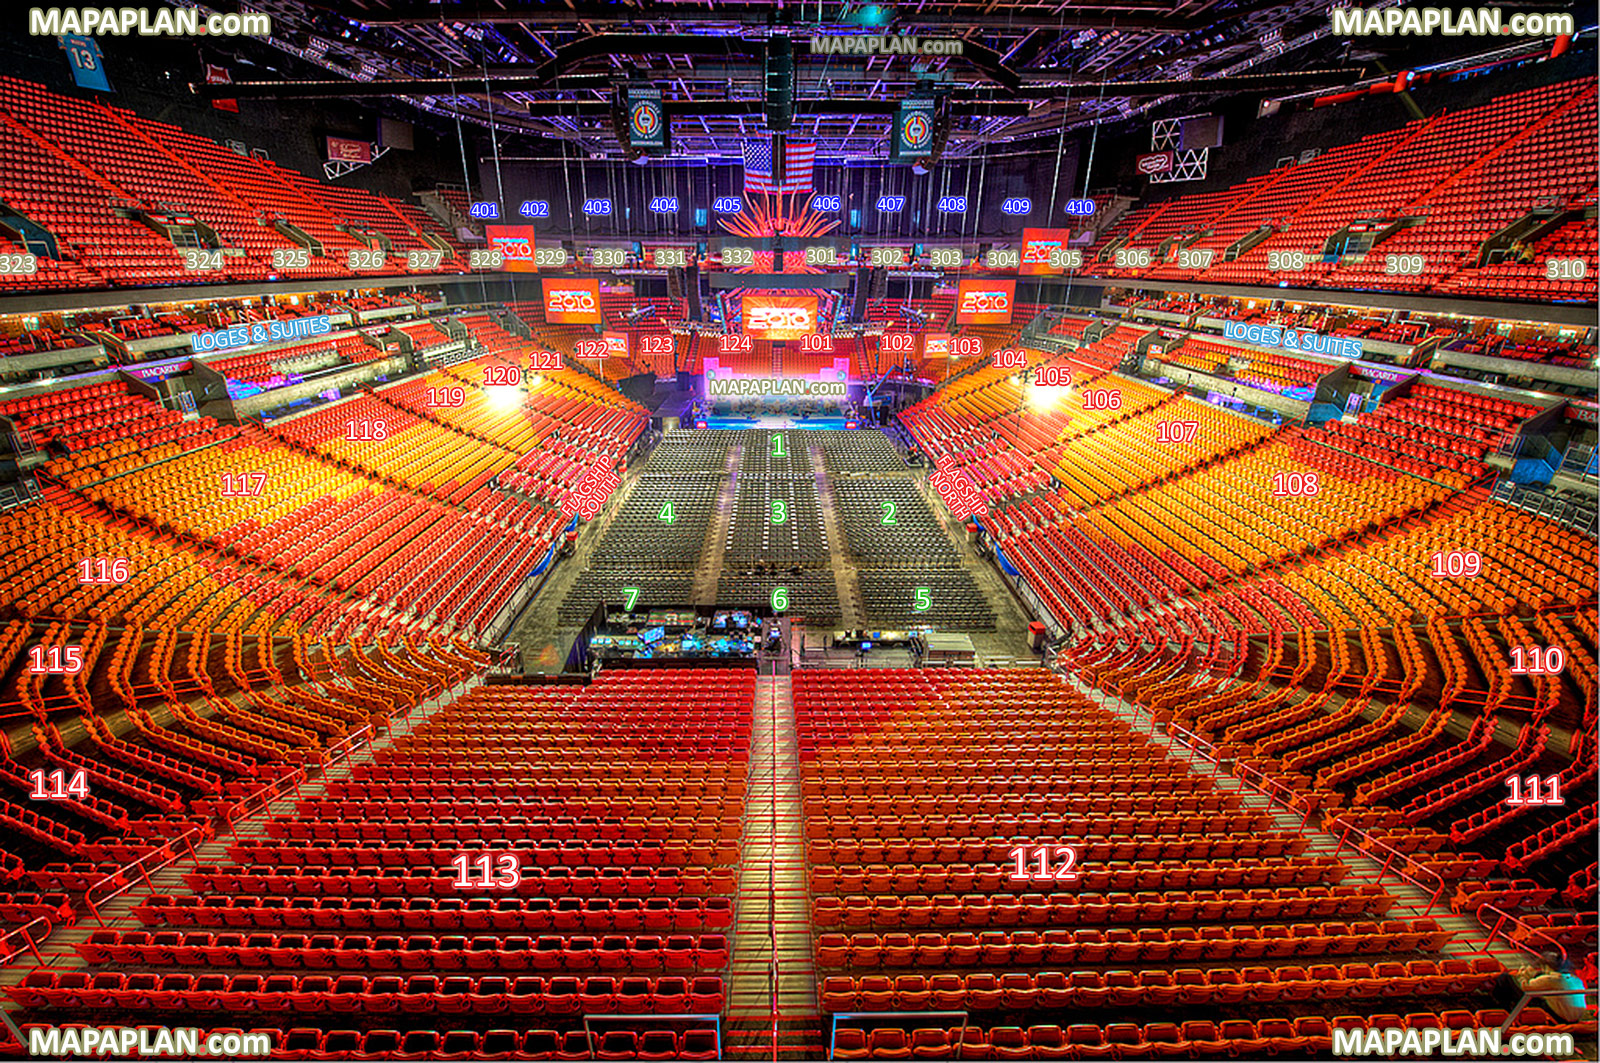 Rogers Arena Concert Seating View Elcho Table